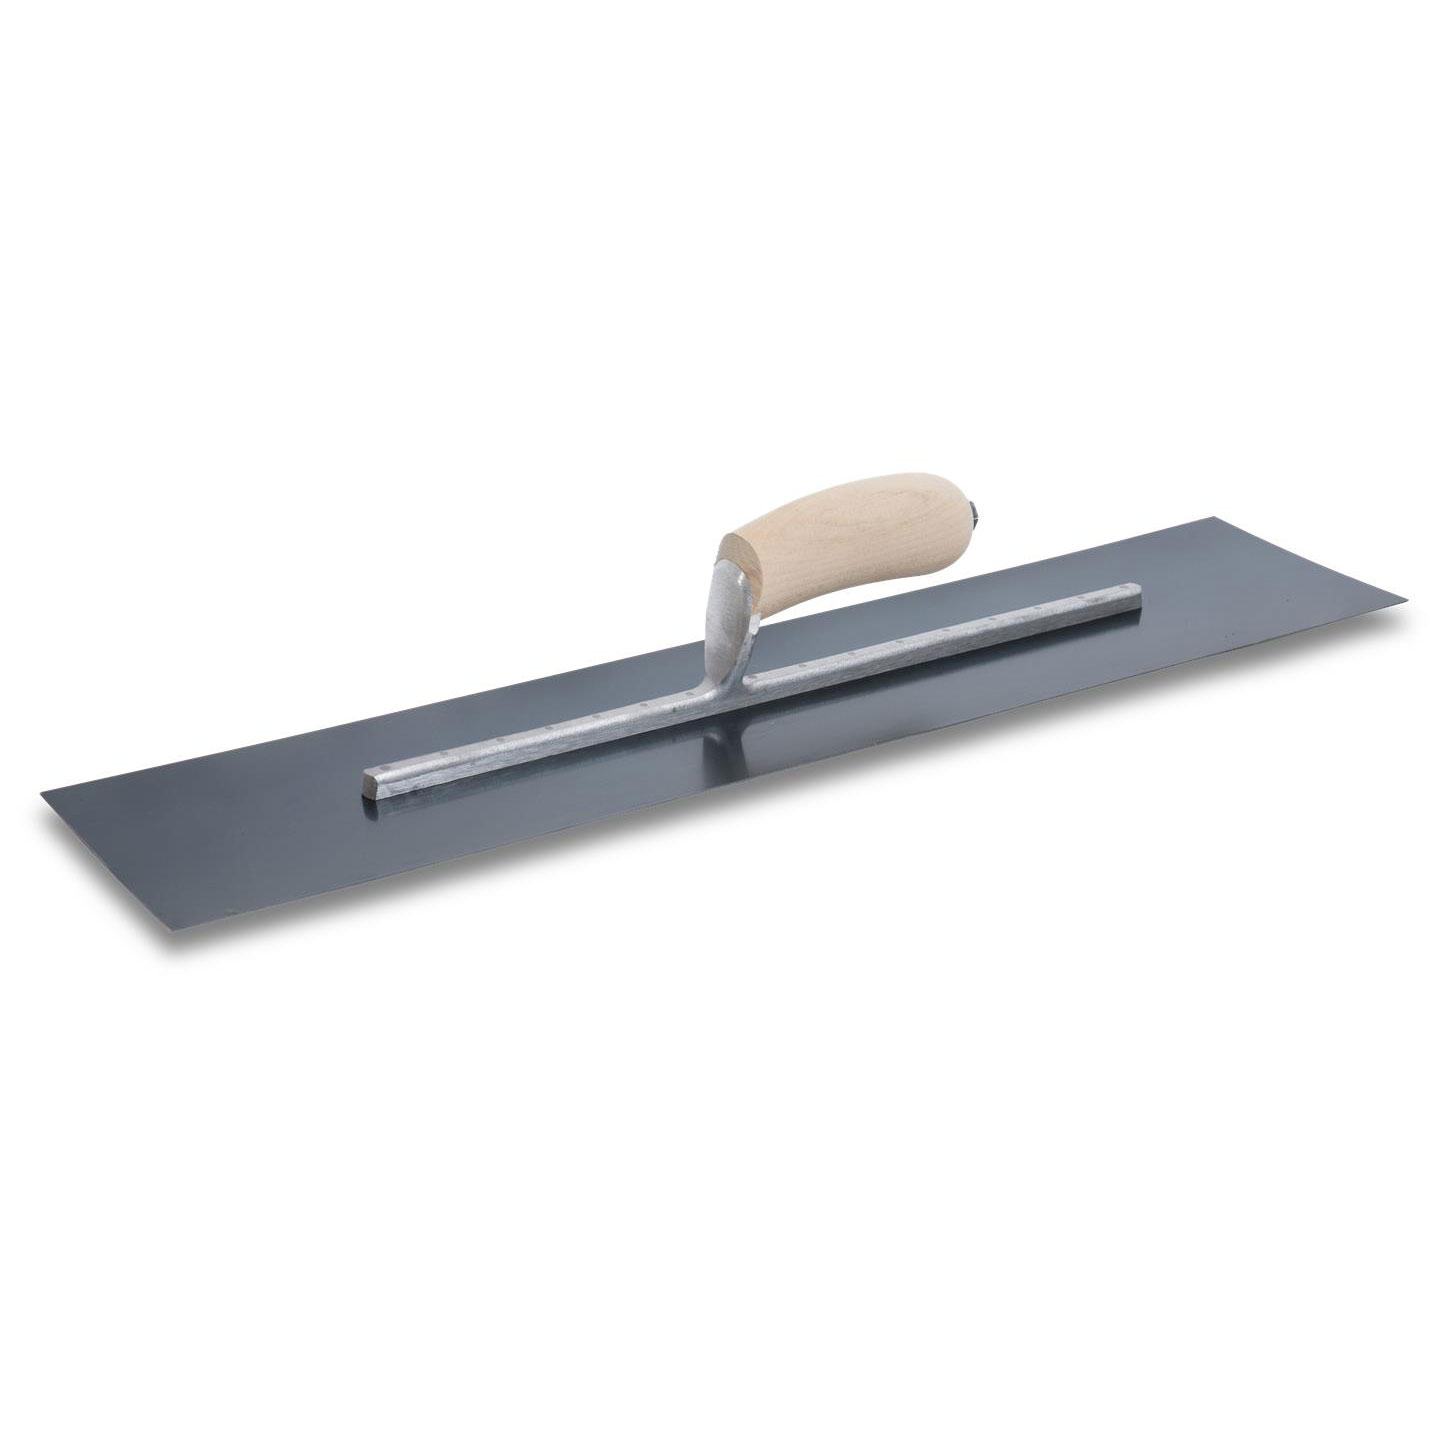 Marshalltown MXS224B 22in x 4in Blue Steel Finishing Trowel with Curved Wood Handle MXS224B